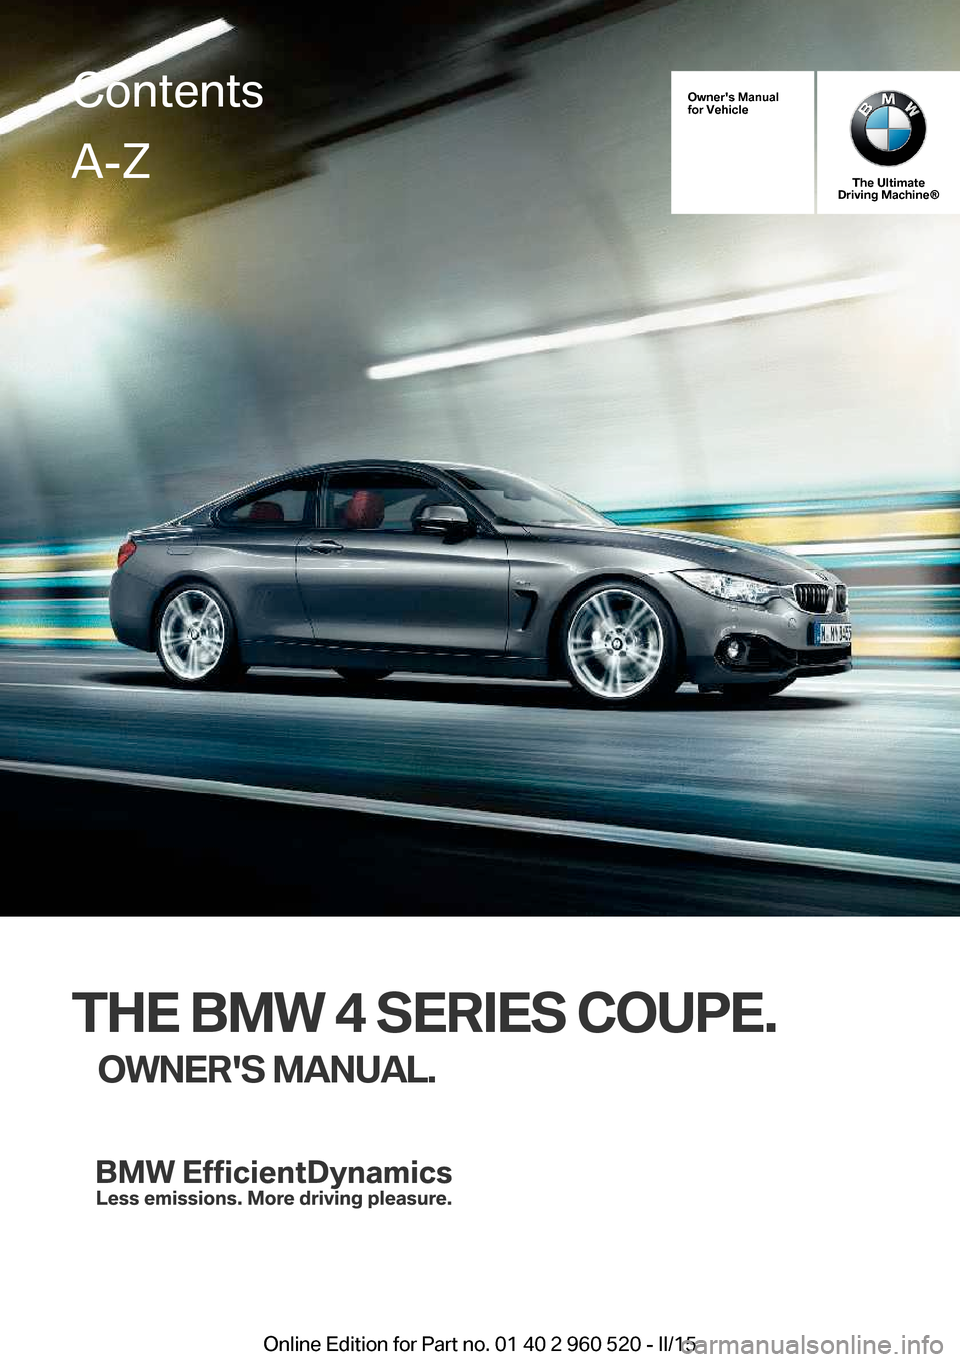 BMW 4 SERIES COUPE 2016 F32 Owners Manual Owners Manual
for Vehicle
The Ultimate
Driving Machine®
THE BMW 4 SERIES COUPE.
OWNERS MANUAL.
ContentsA-Z
Online Edition for Part no. 01 40 2 960 520 - II/15   